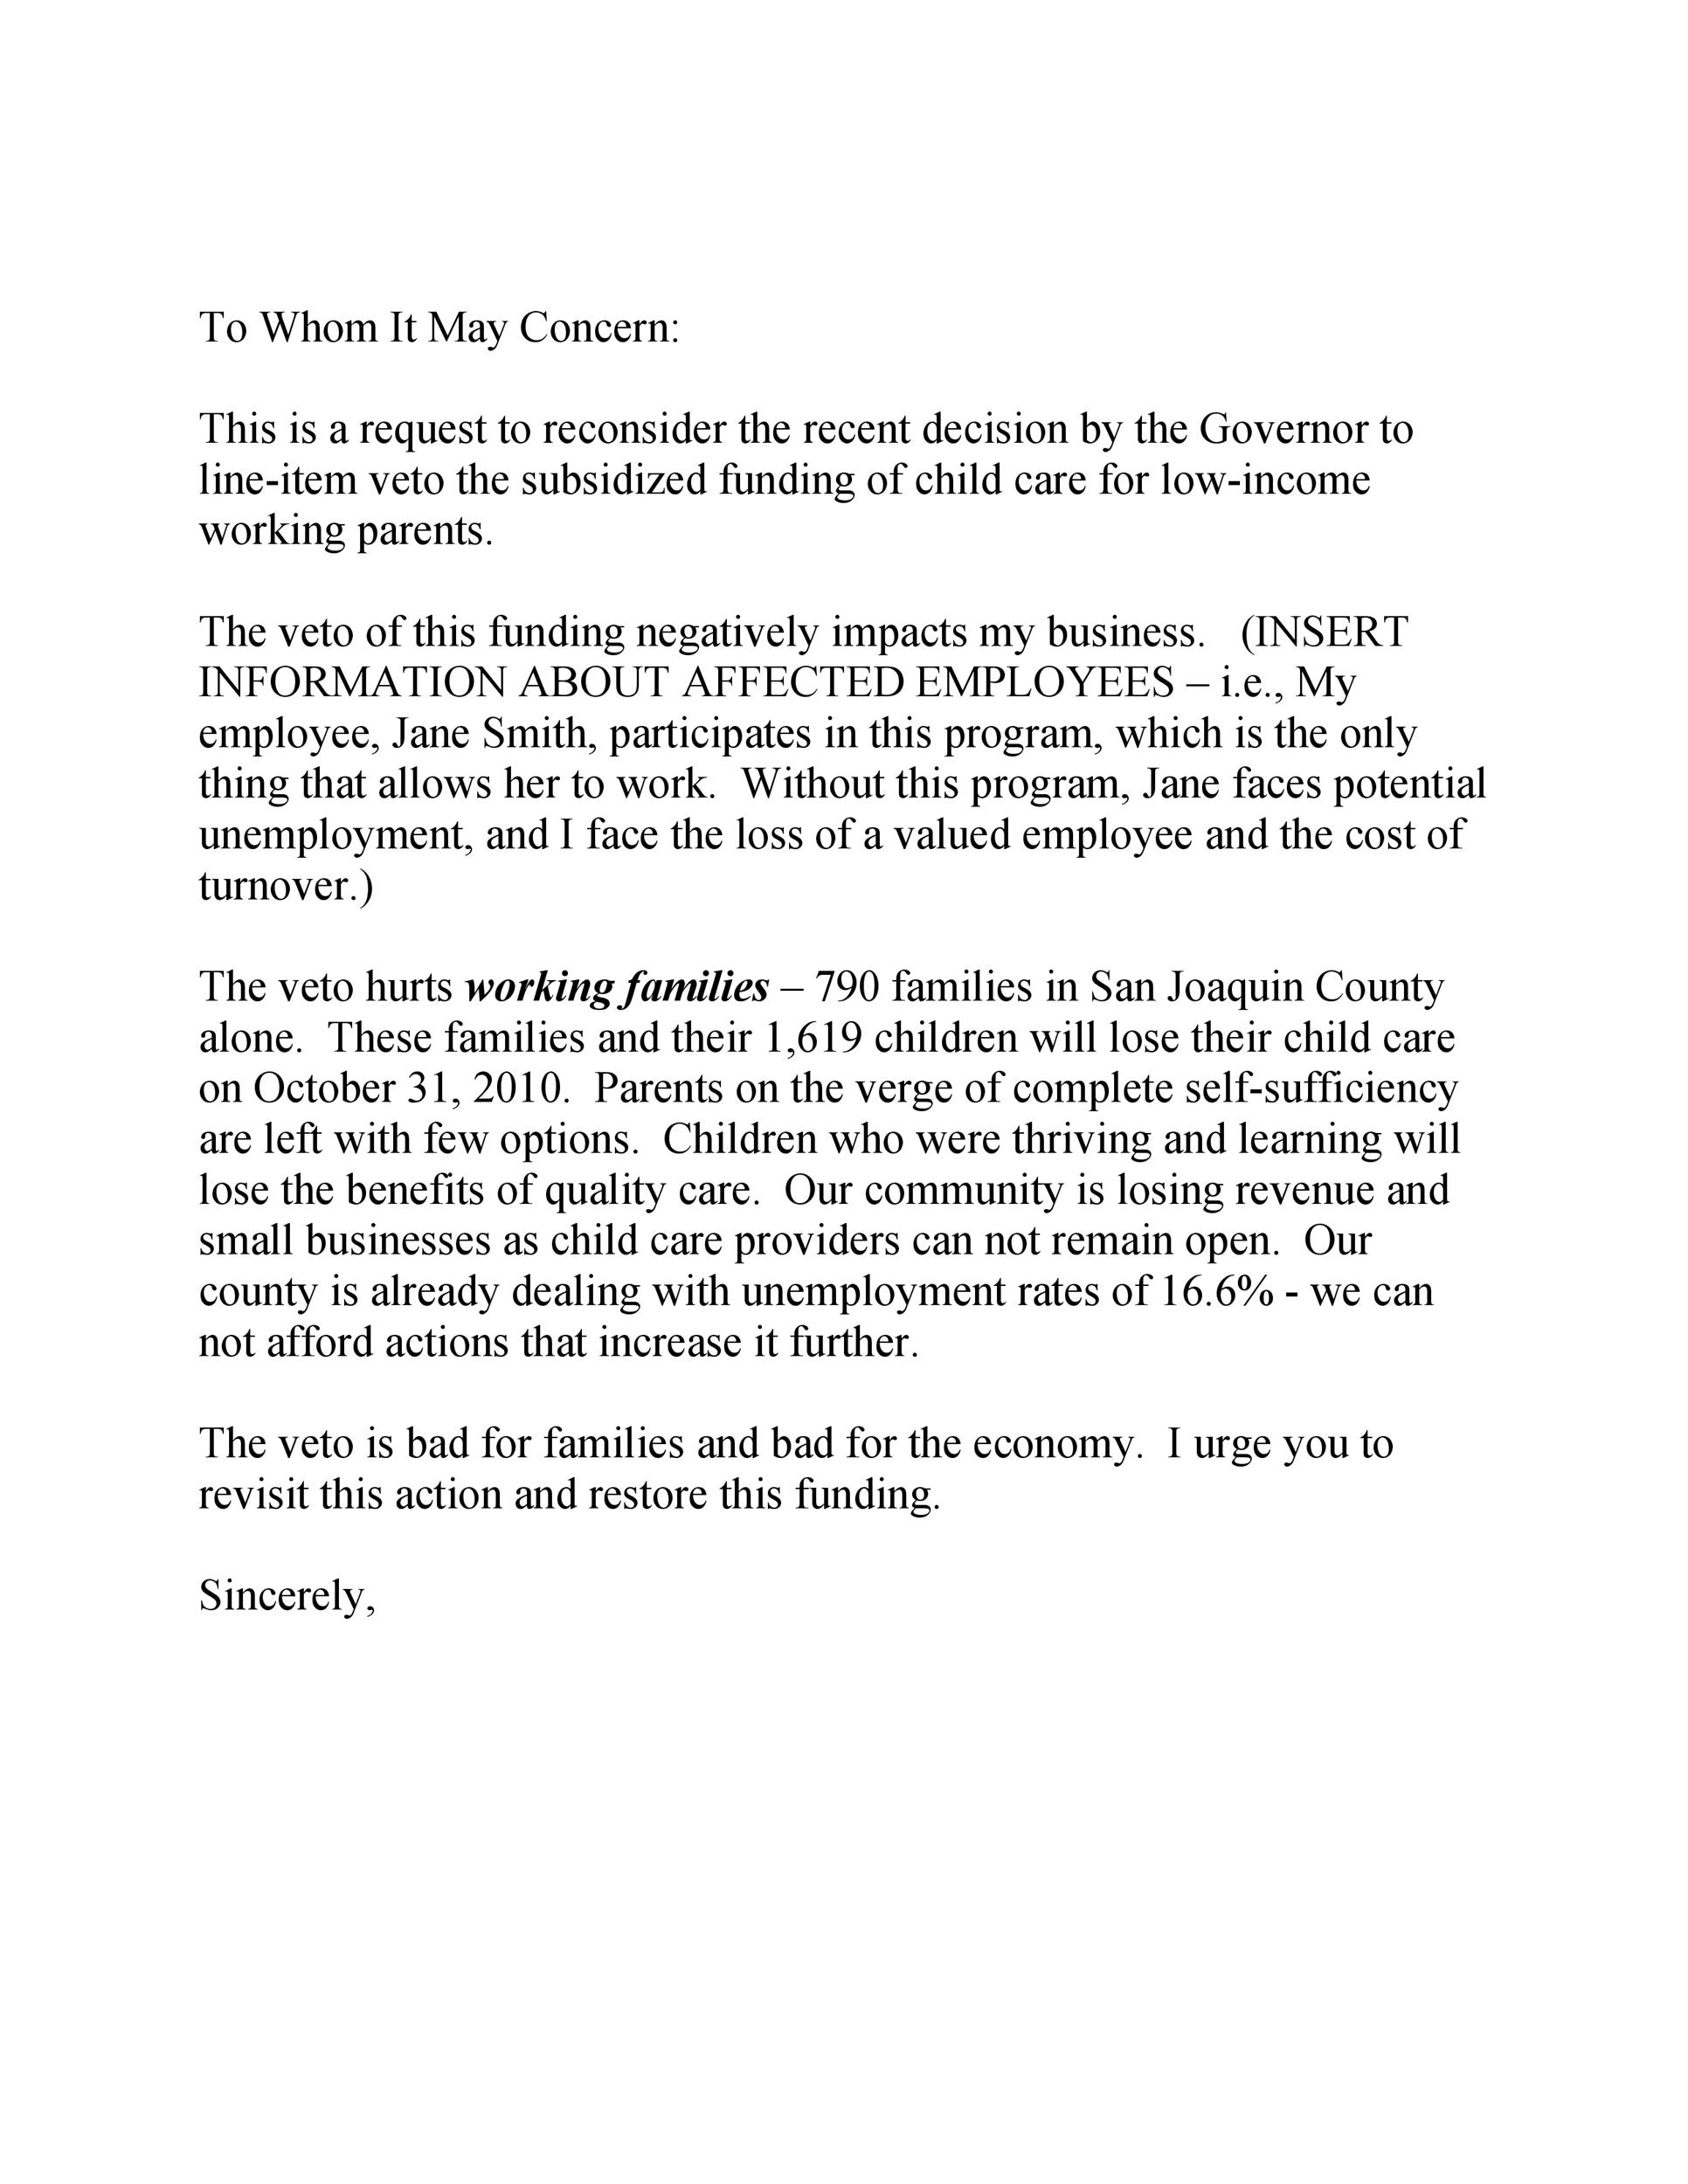 how-to-write-to-whom-it-may-concern-letter-template